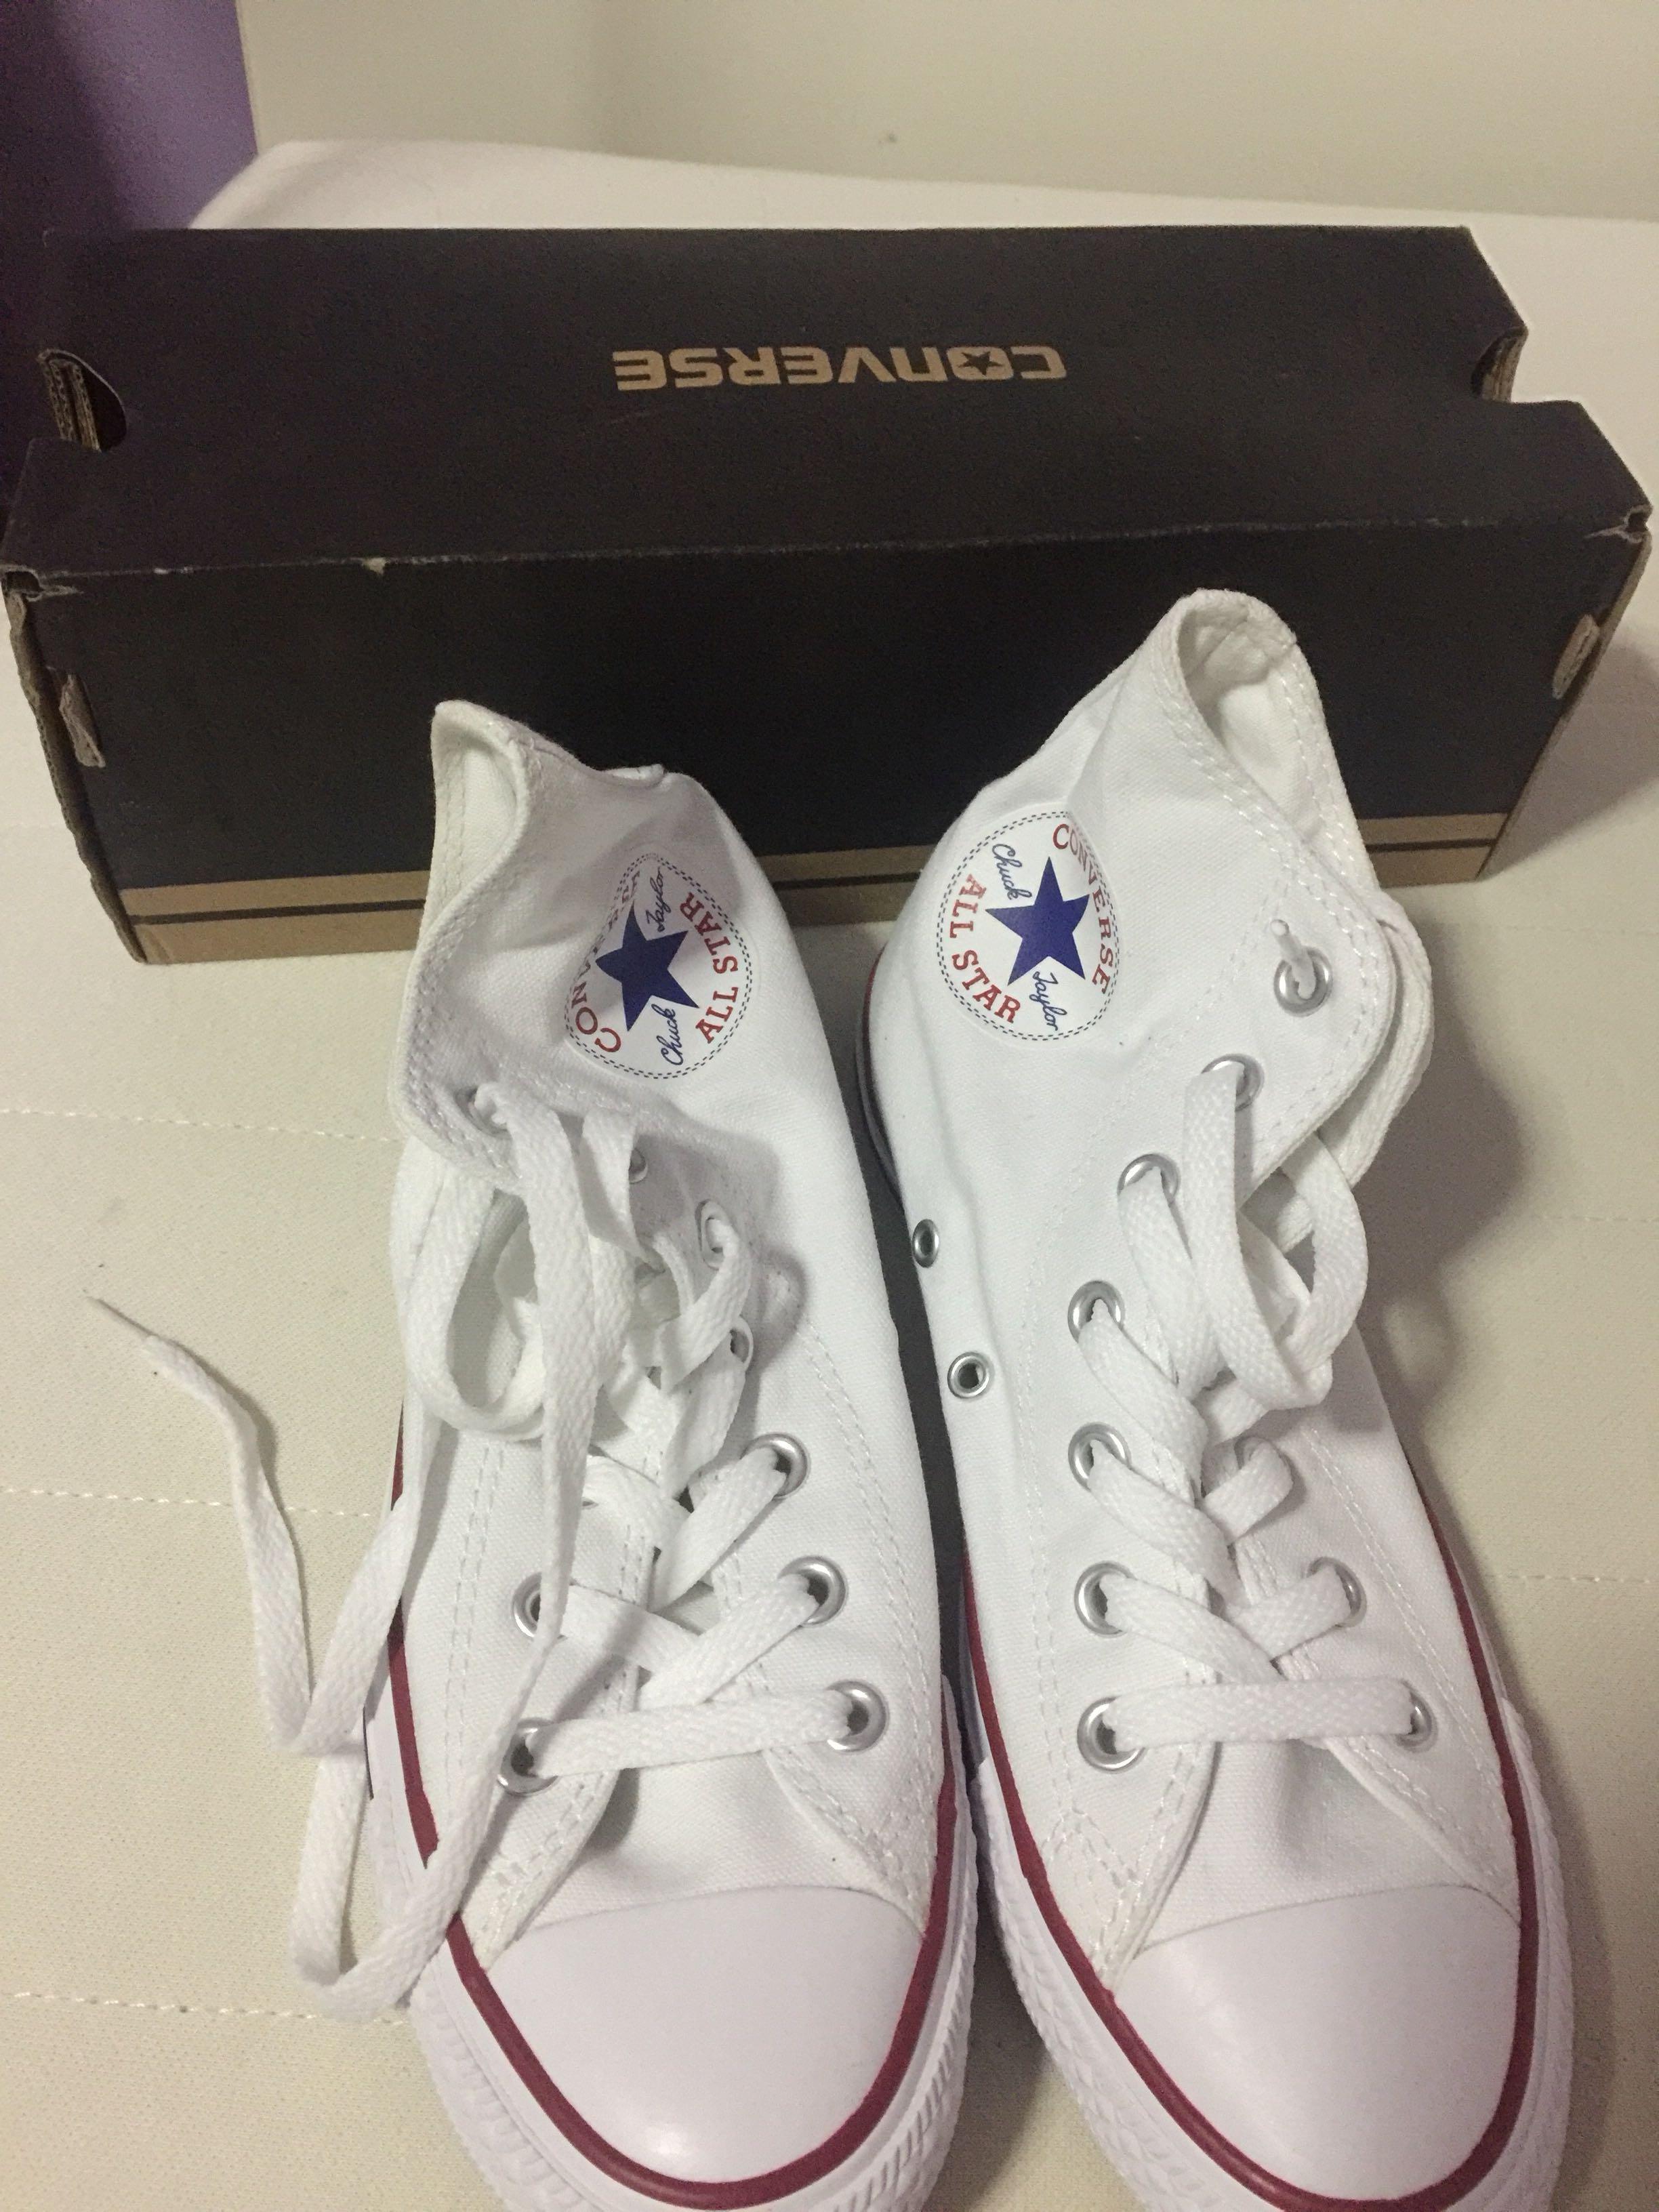 Brand New White Converse Shoes, Women's 